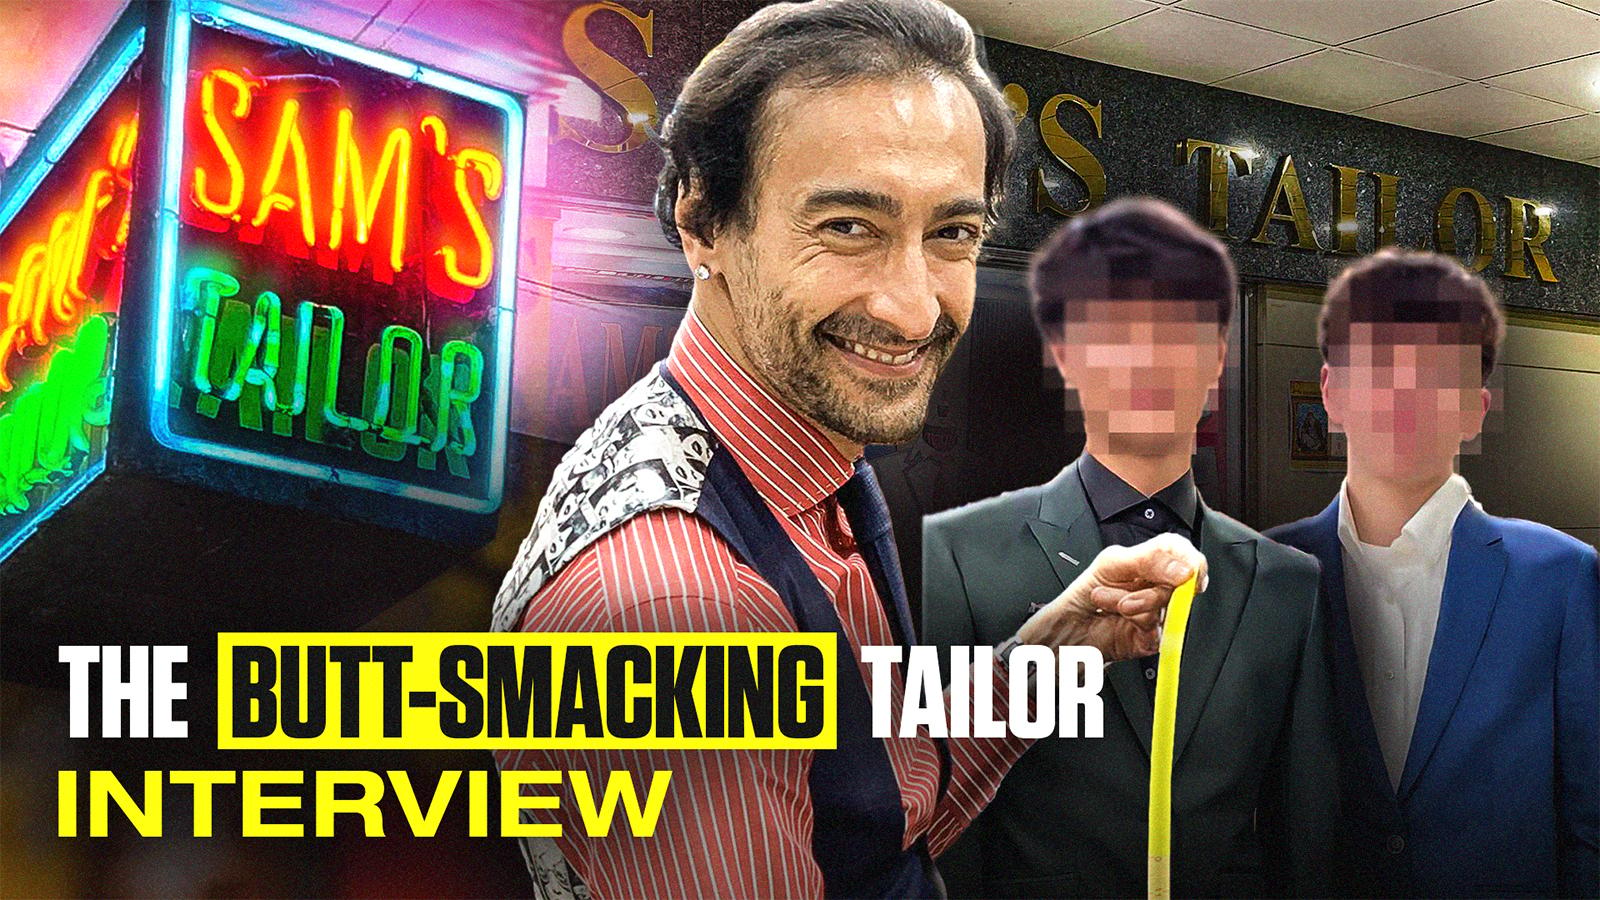 sams-tailor-butt-smacking-tailor-interview-unusually-famous